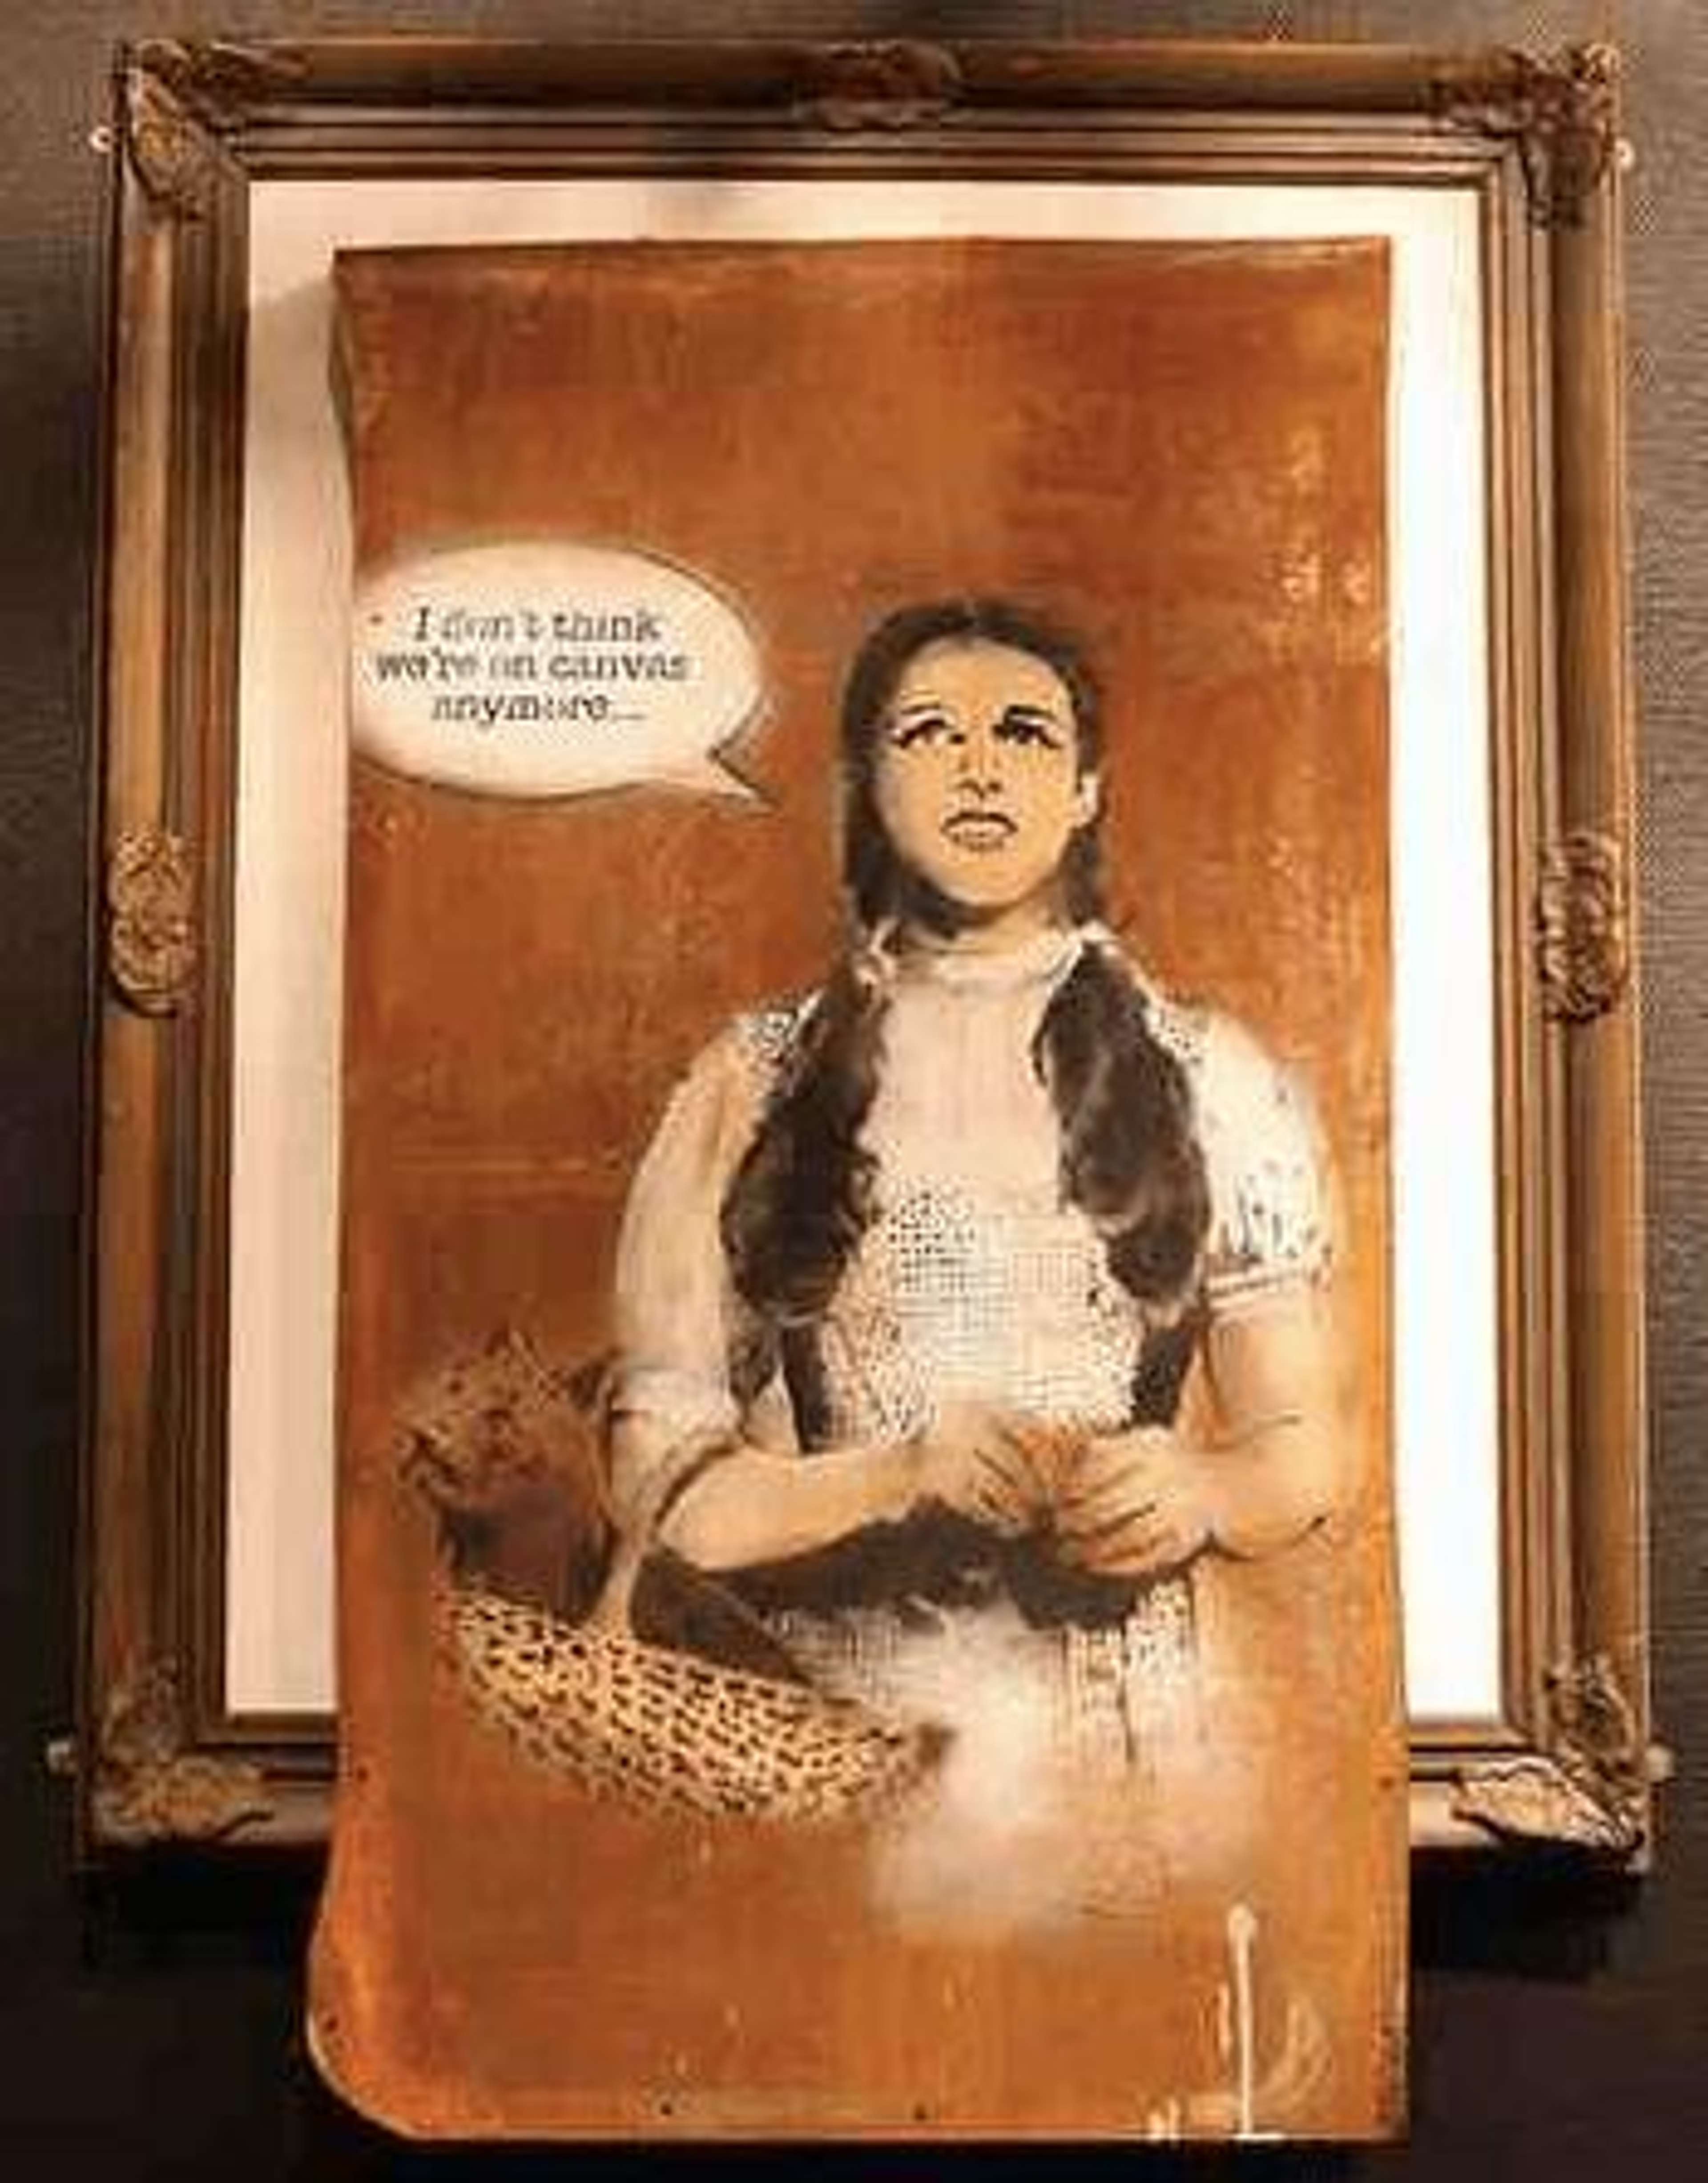 Banksy's Dorothy. A spray paint work on a poster of the character Dorothy holding a dog in a basket with the text "I don't think we're on canvass anymore..."